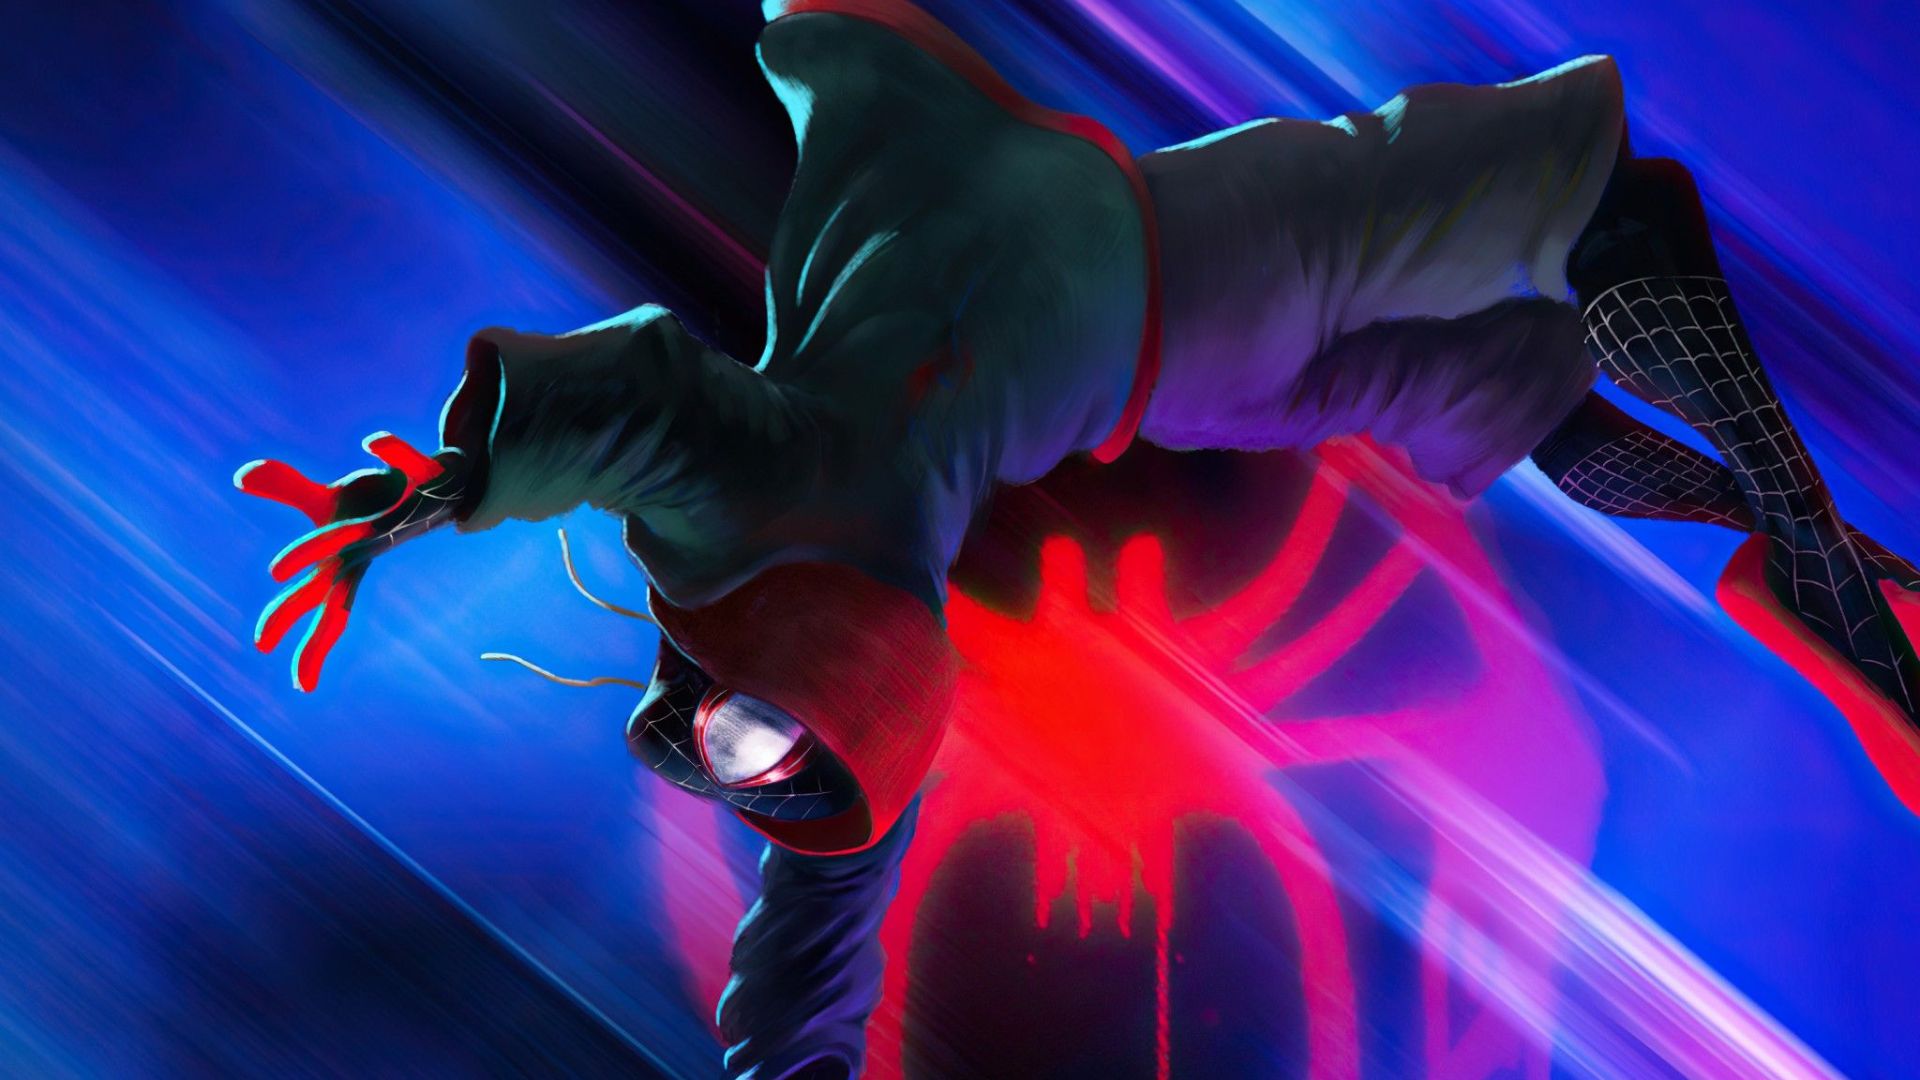 Neon Spider Man Backgrounds PC